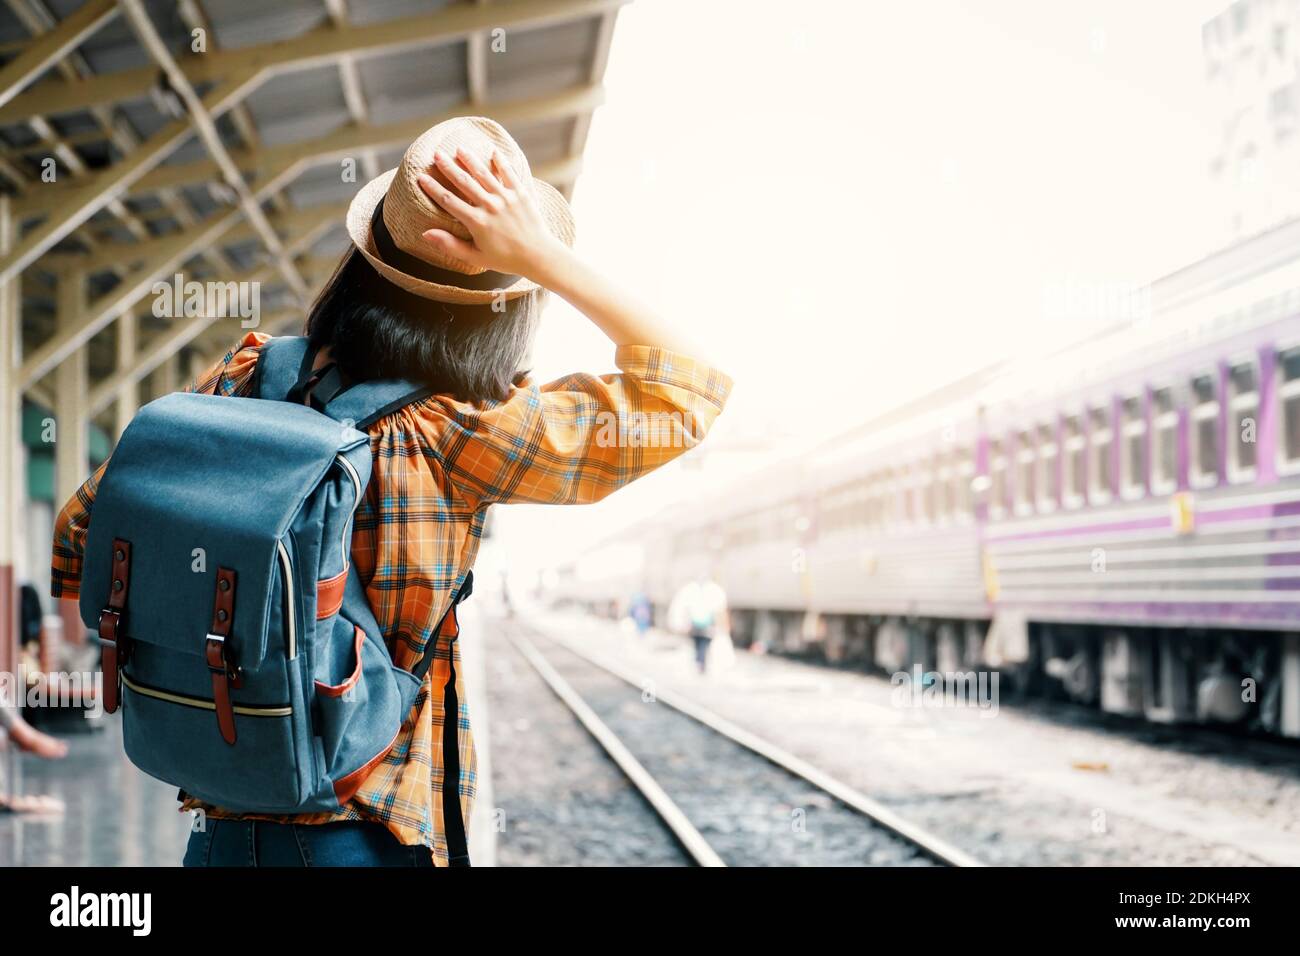 Rear View Of Woman Waiting For Train At Railroad Station Platform Stock Photo